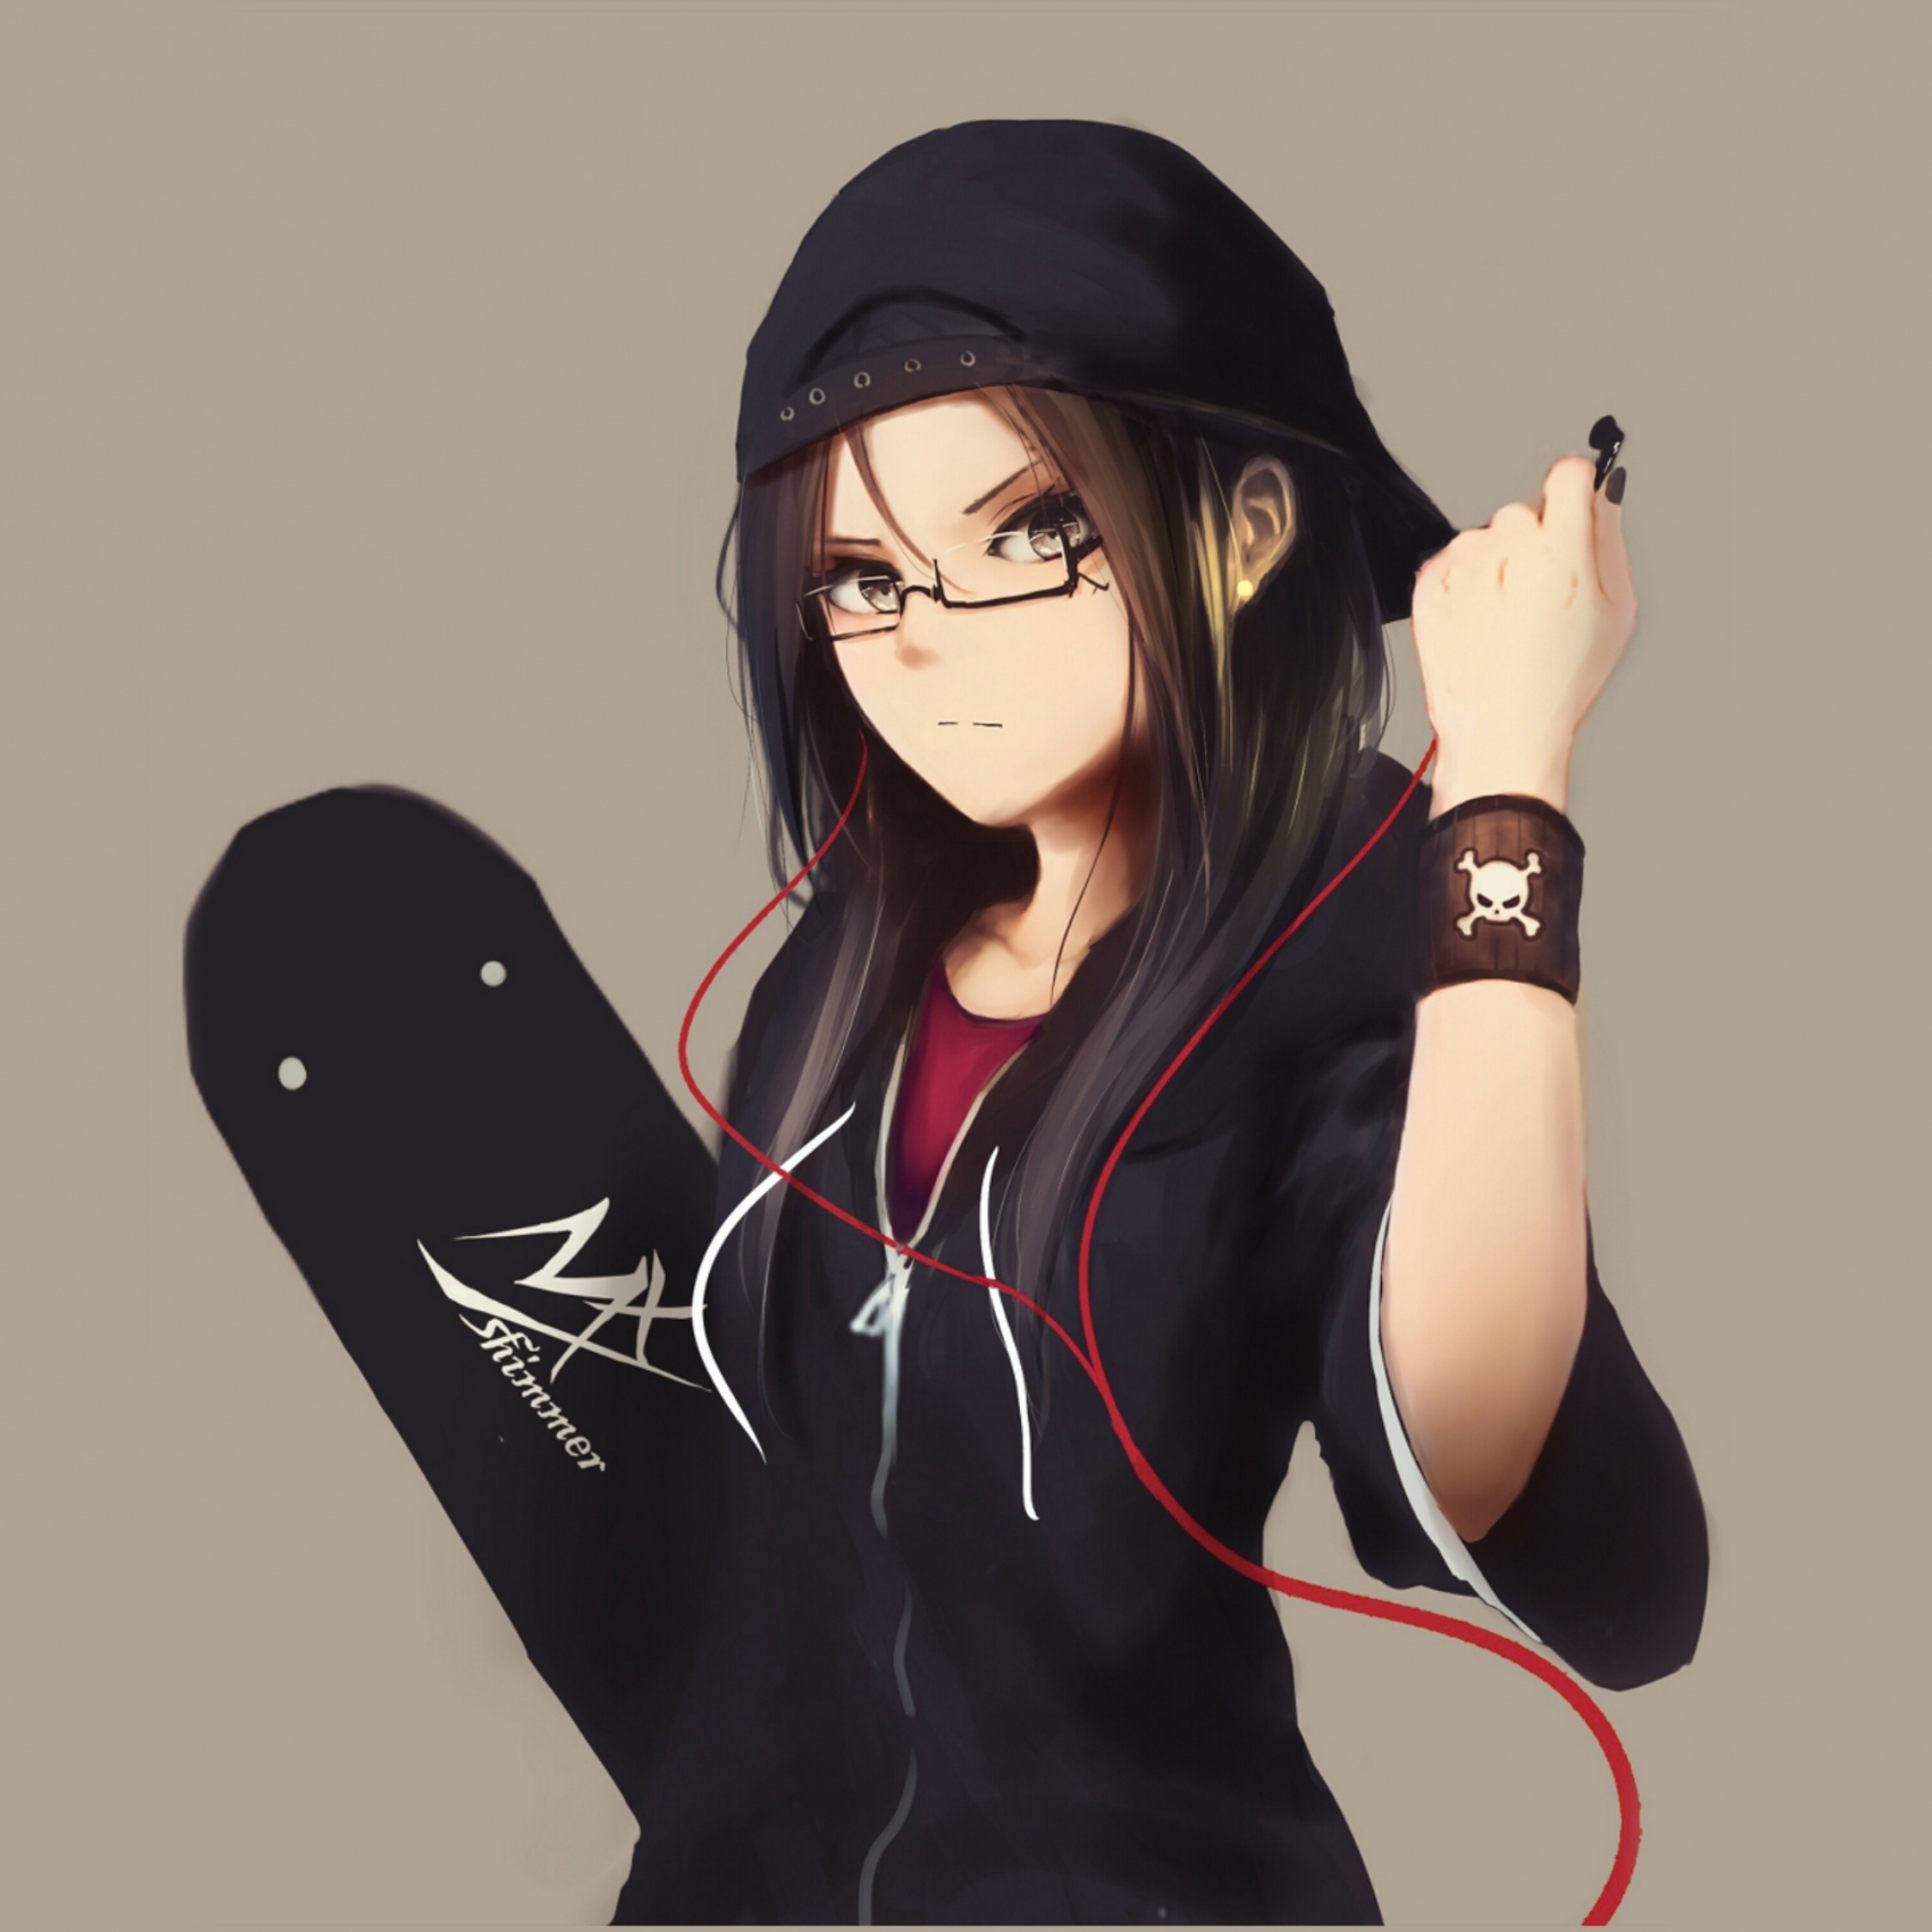 Wallpaper Anime Girl Cool, Buy Now, Hot Sale, 50% OFF,  